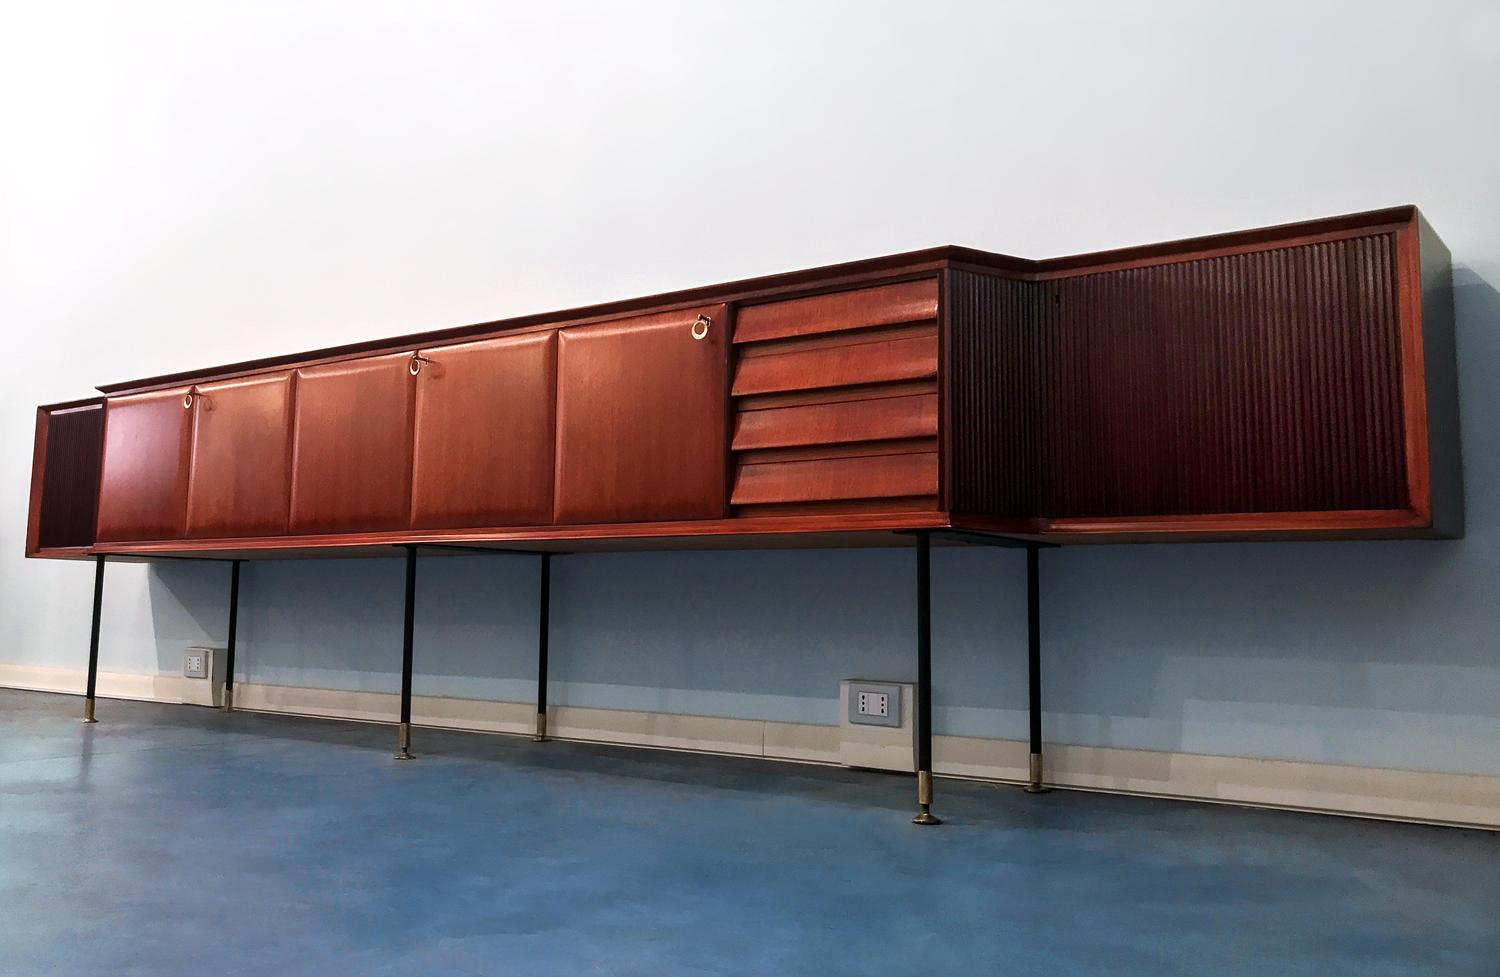 Stunning Italian teak wood long sideboard designed by Vittorio Dassi in the 1950s.
The structure is a unique piece composed by a long floating cabinet supported by metal legs finished with brass feet, and many cabinets with doors, partly in teak